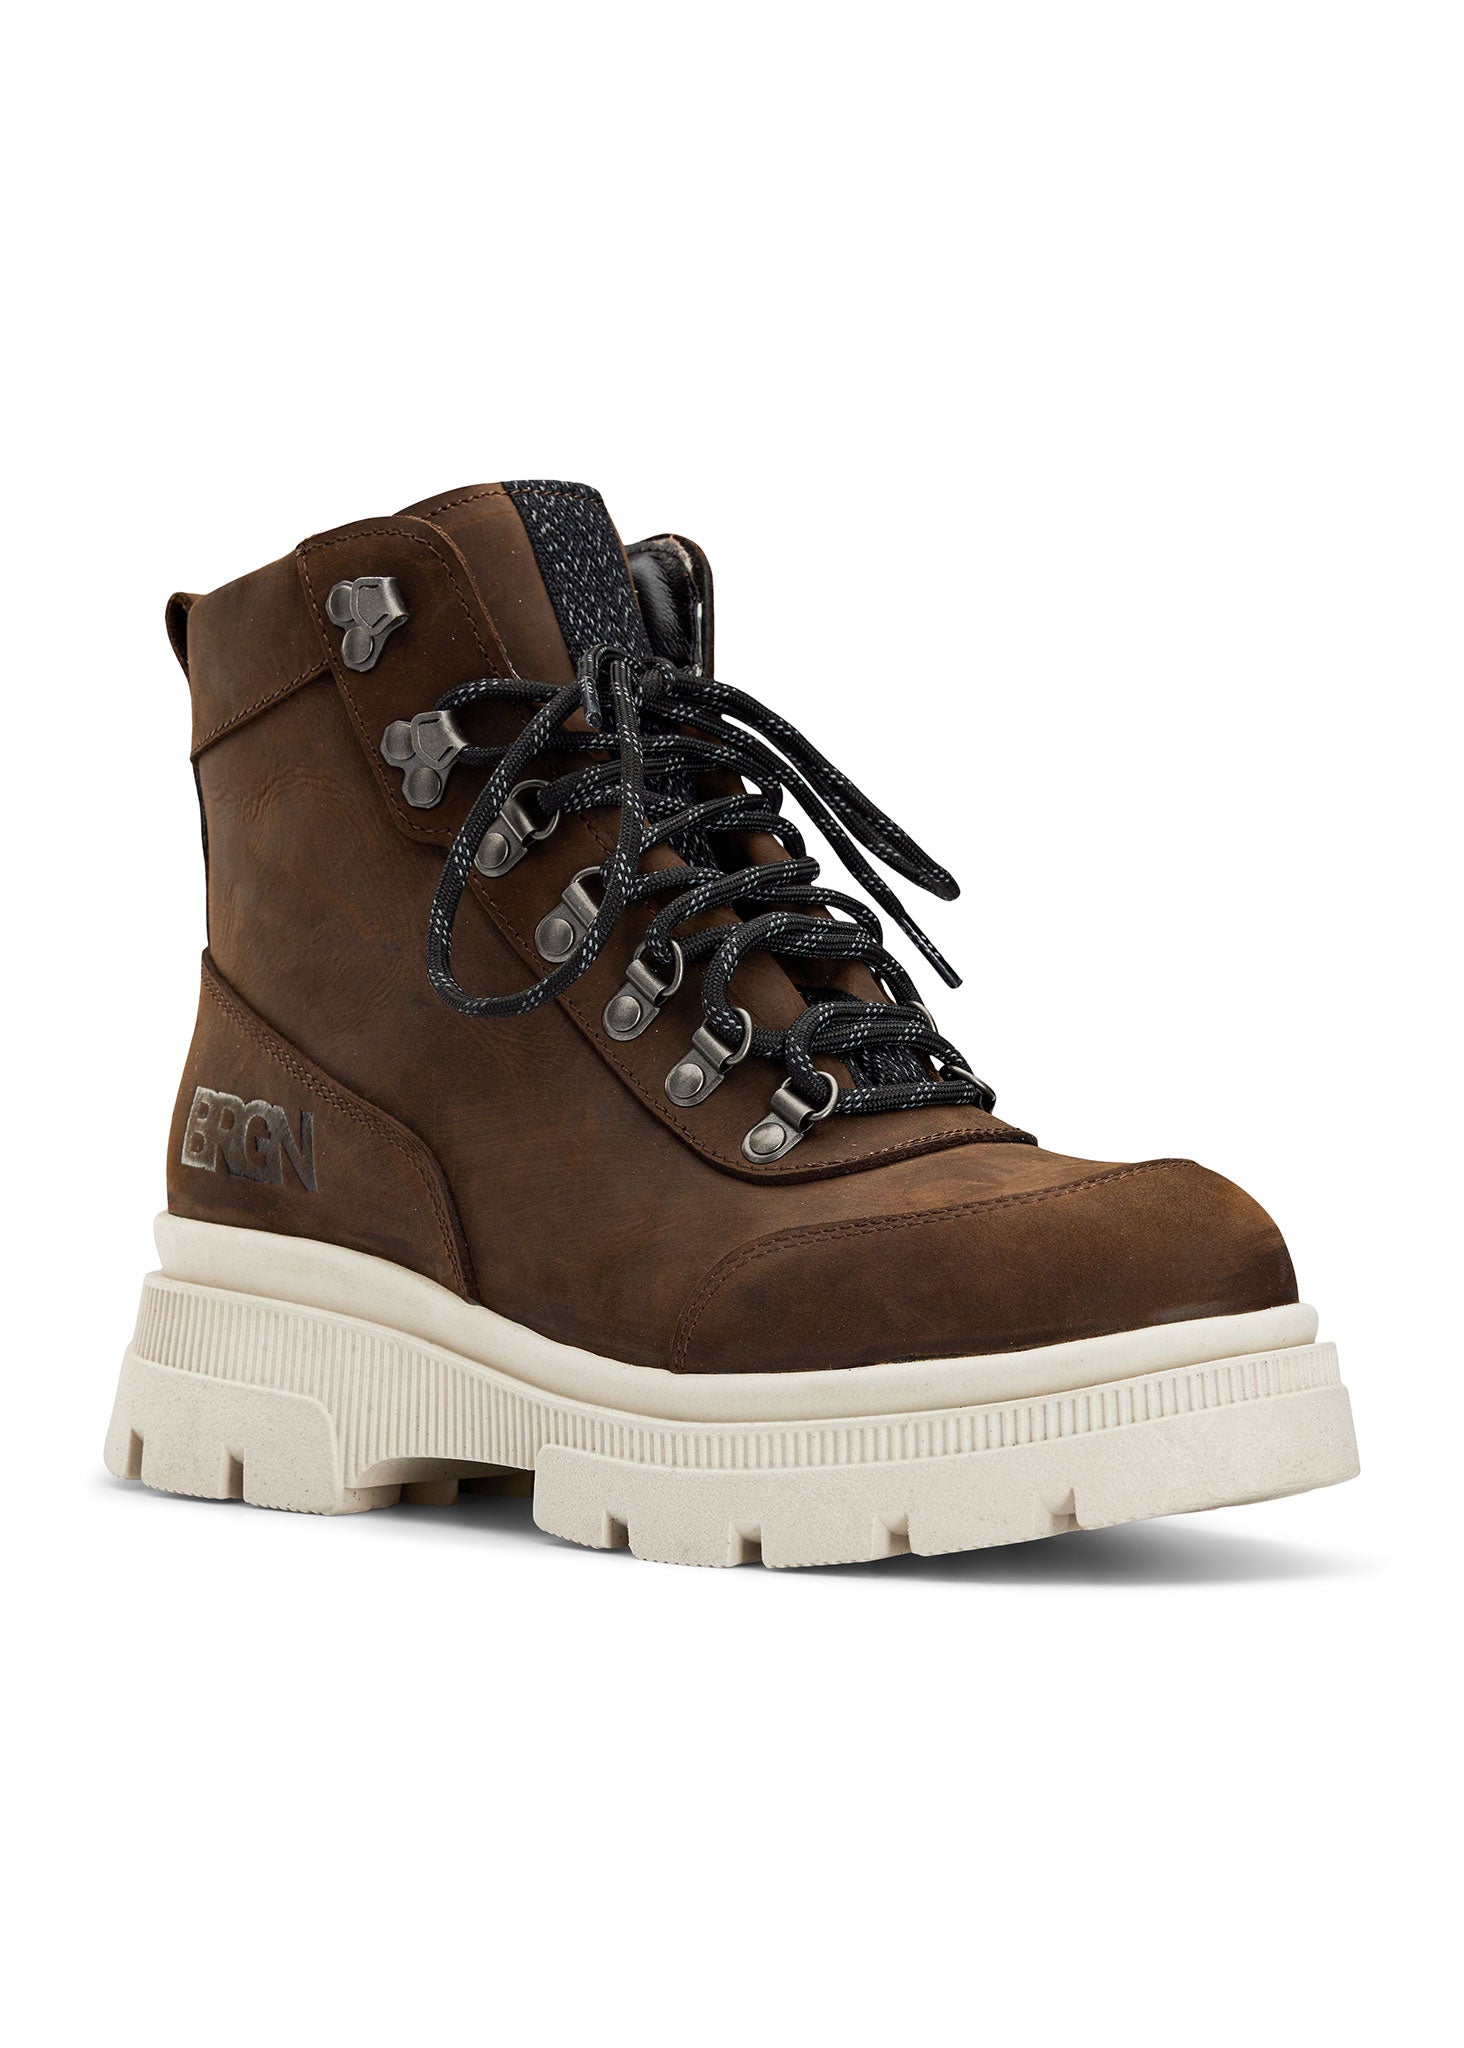 BRGN Hiking Boots Shoes 187 Chocolate Brown / 135 Sand